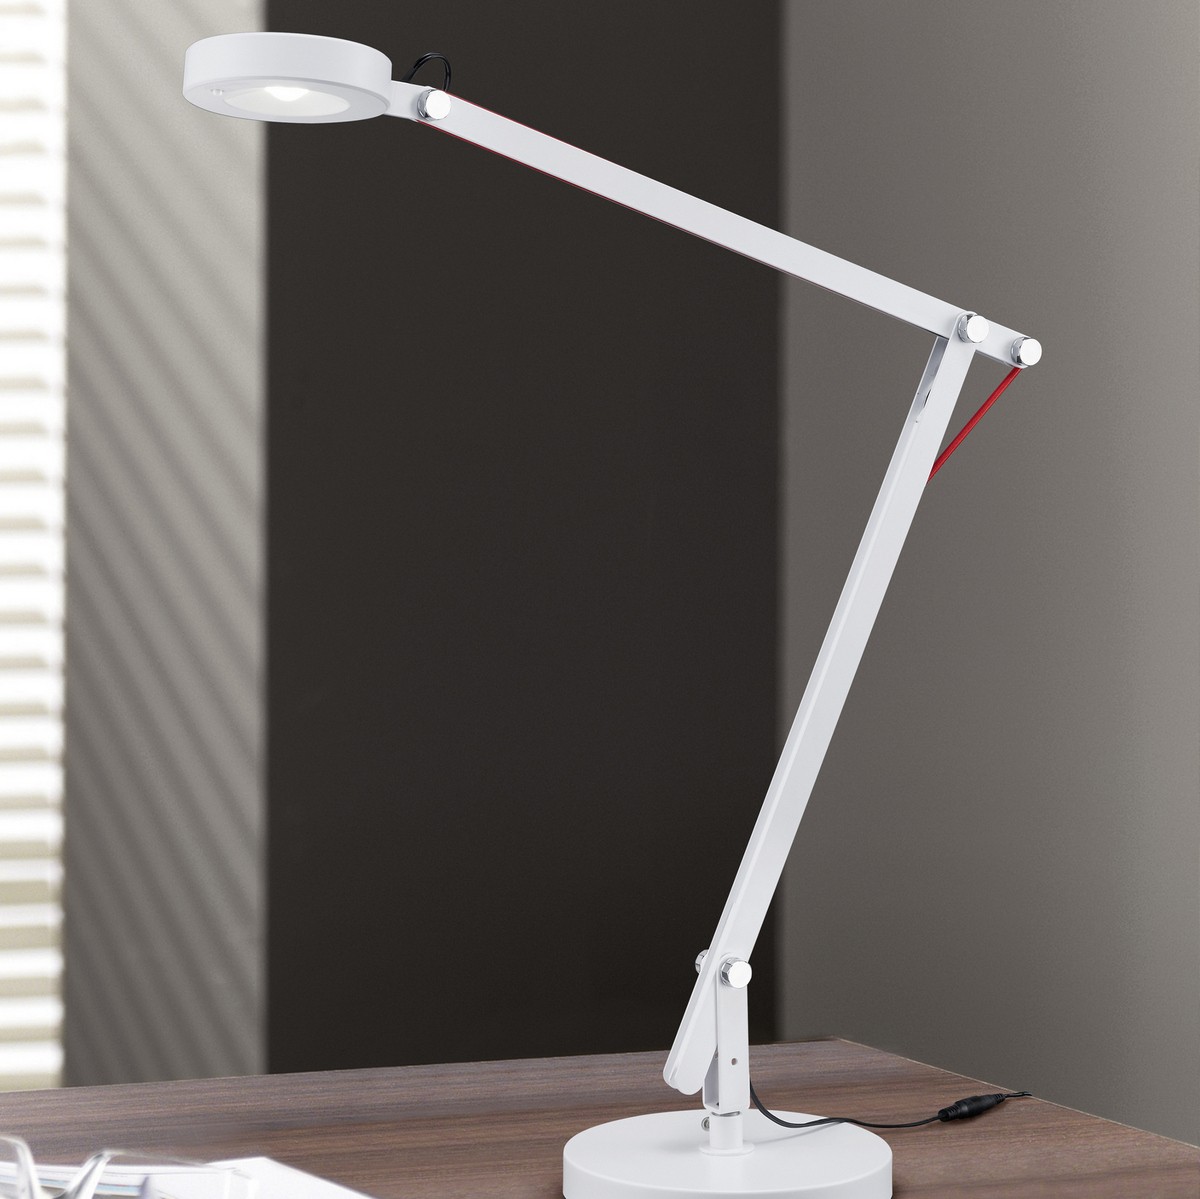 81,95 € Free Shipping | Desk lamp Trio Amsterdam 5W 3000K Warm light. 90×18 cm. Adjustable height. Integrated LED. Directional light Metal casting. White Color